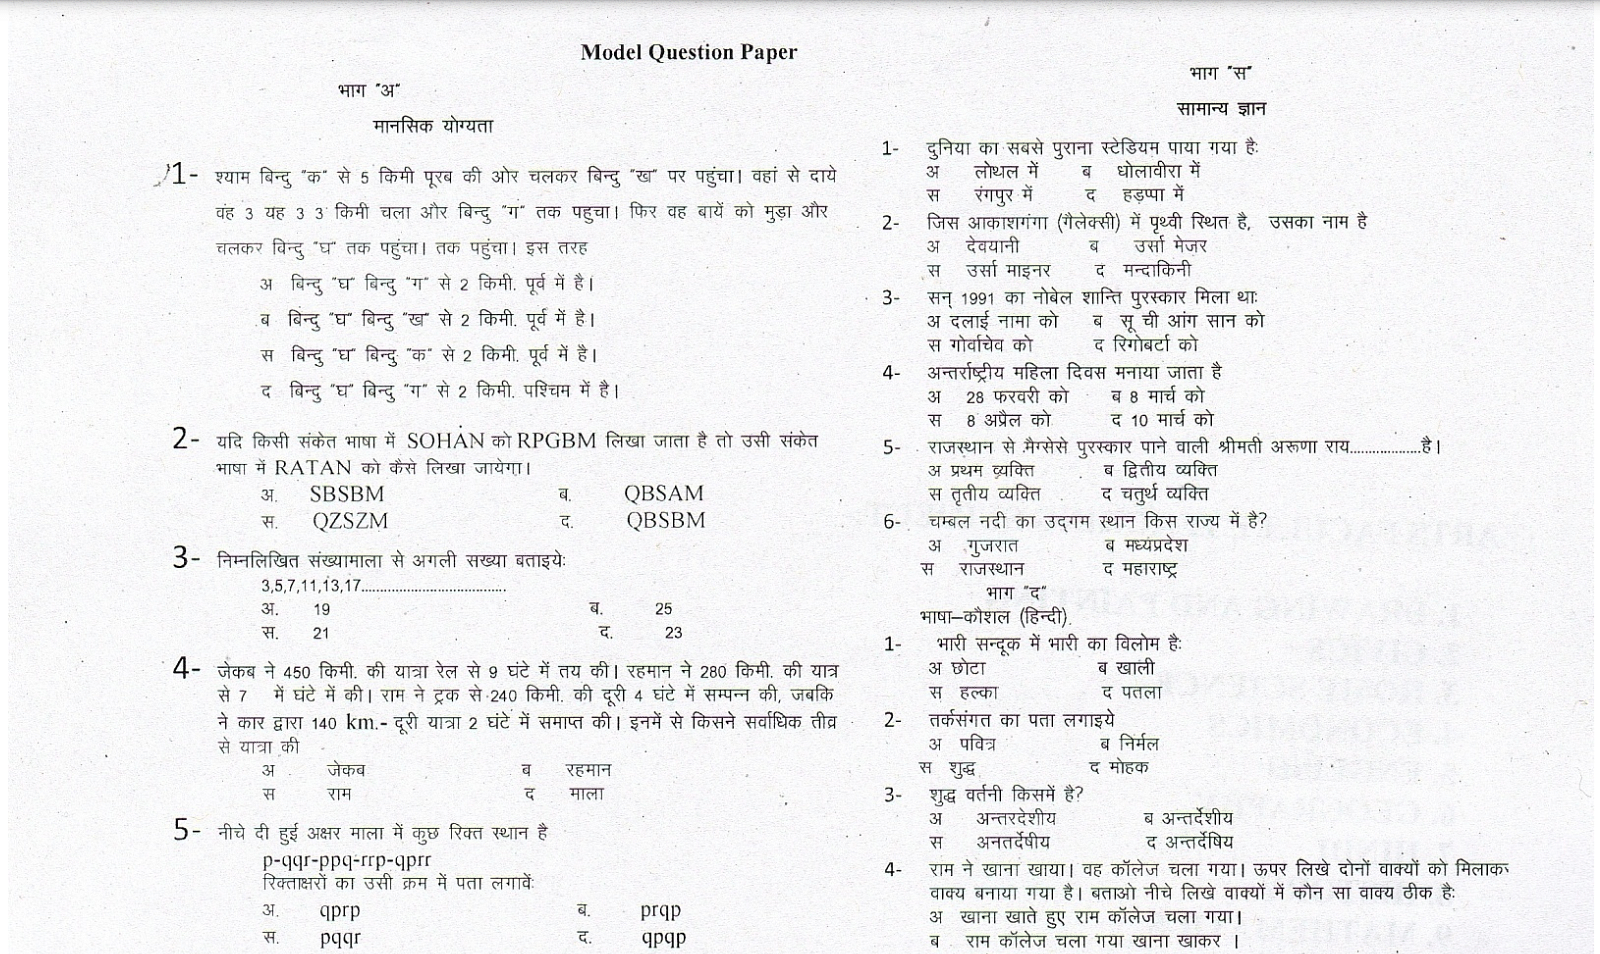 Rajasthan PTET Previous Year Question Paper